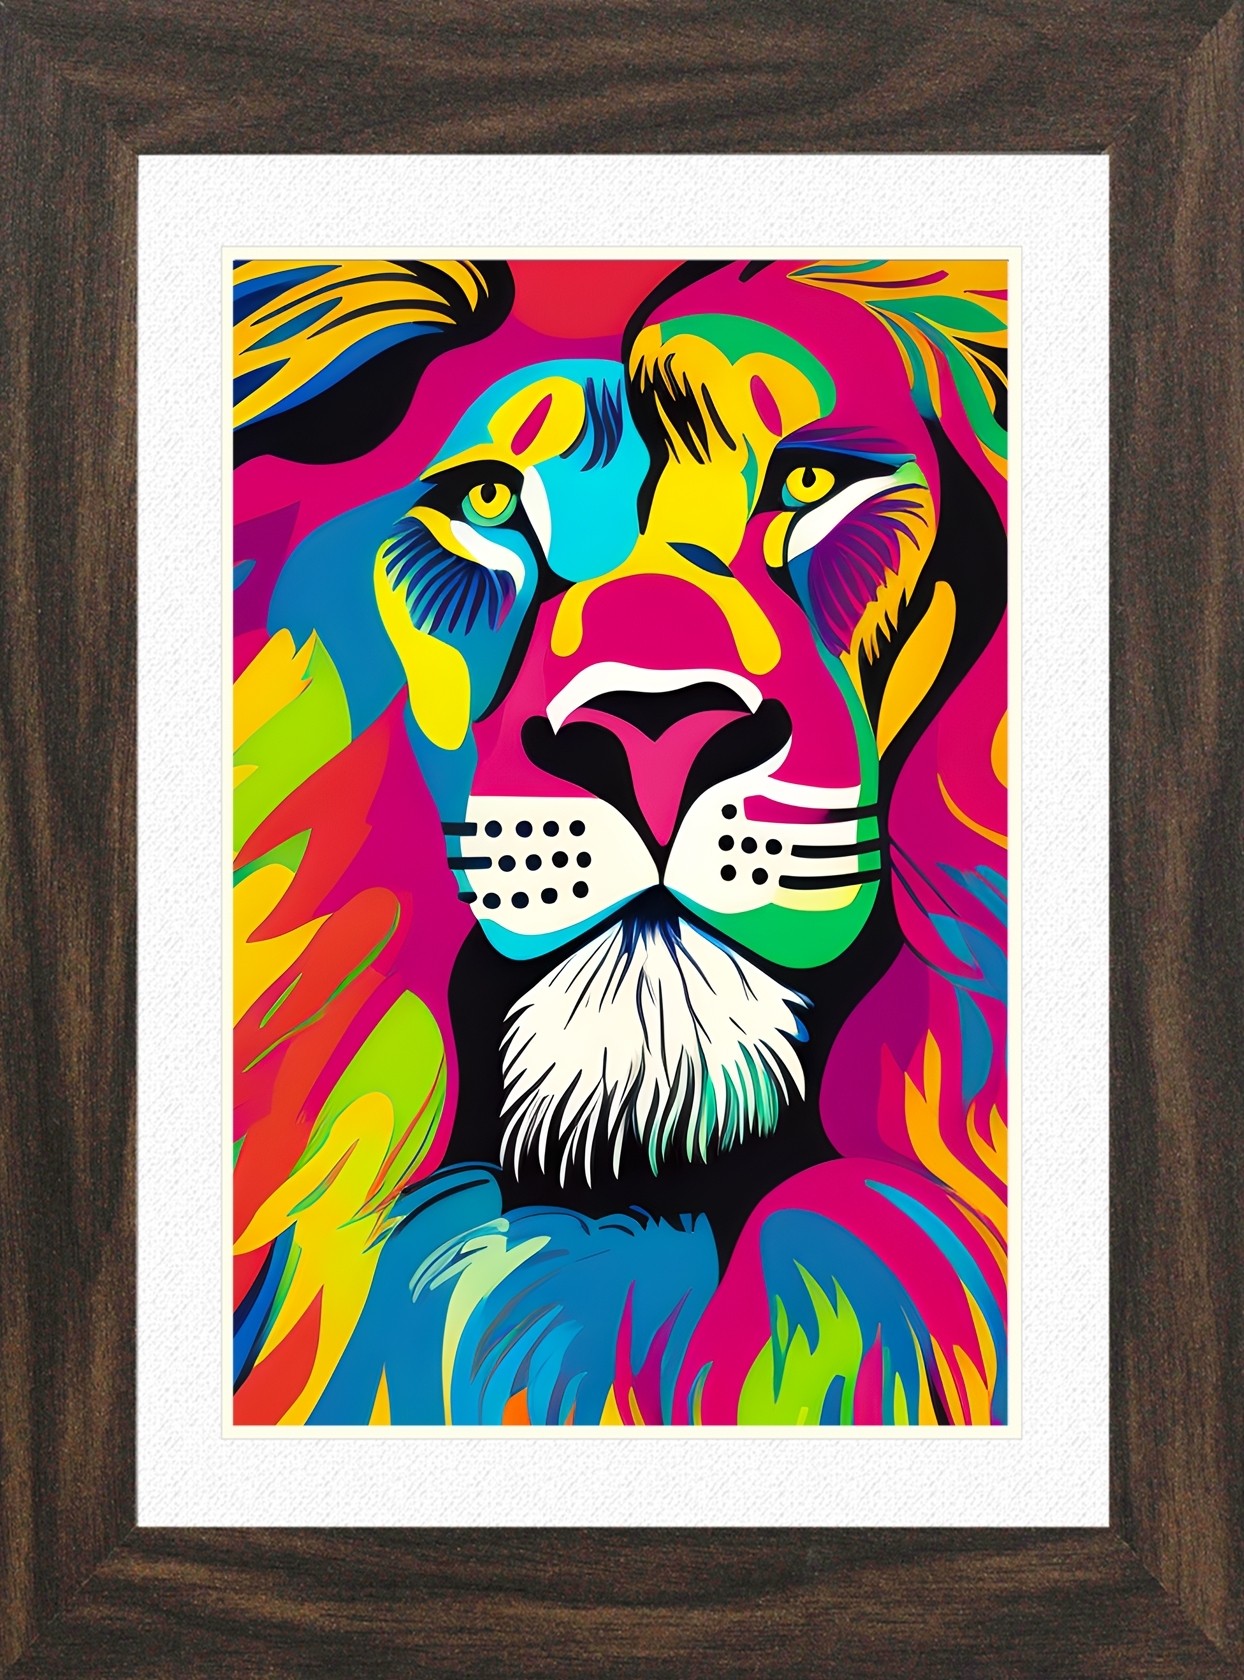 Lion Animal Picture Framed Colourful Abstract Art (A3 Walnut Frame)